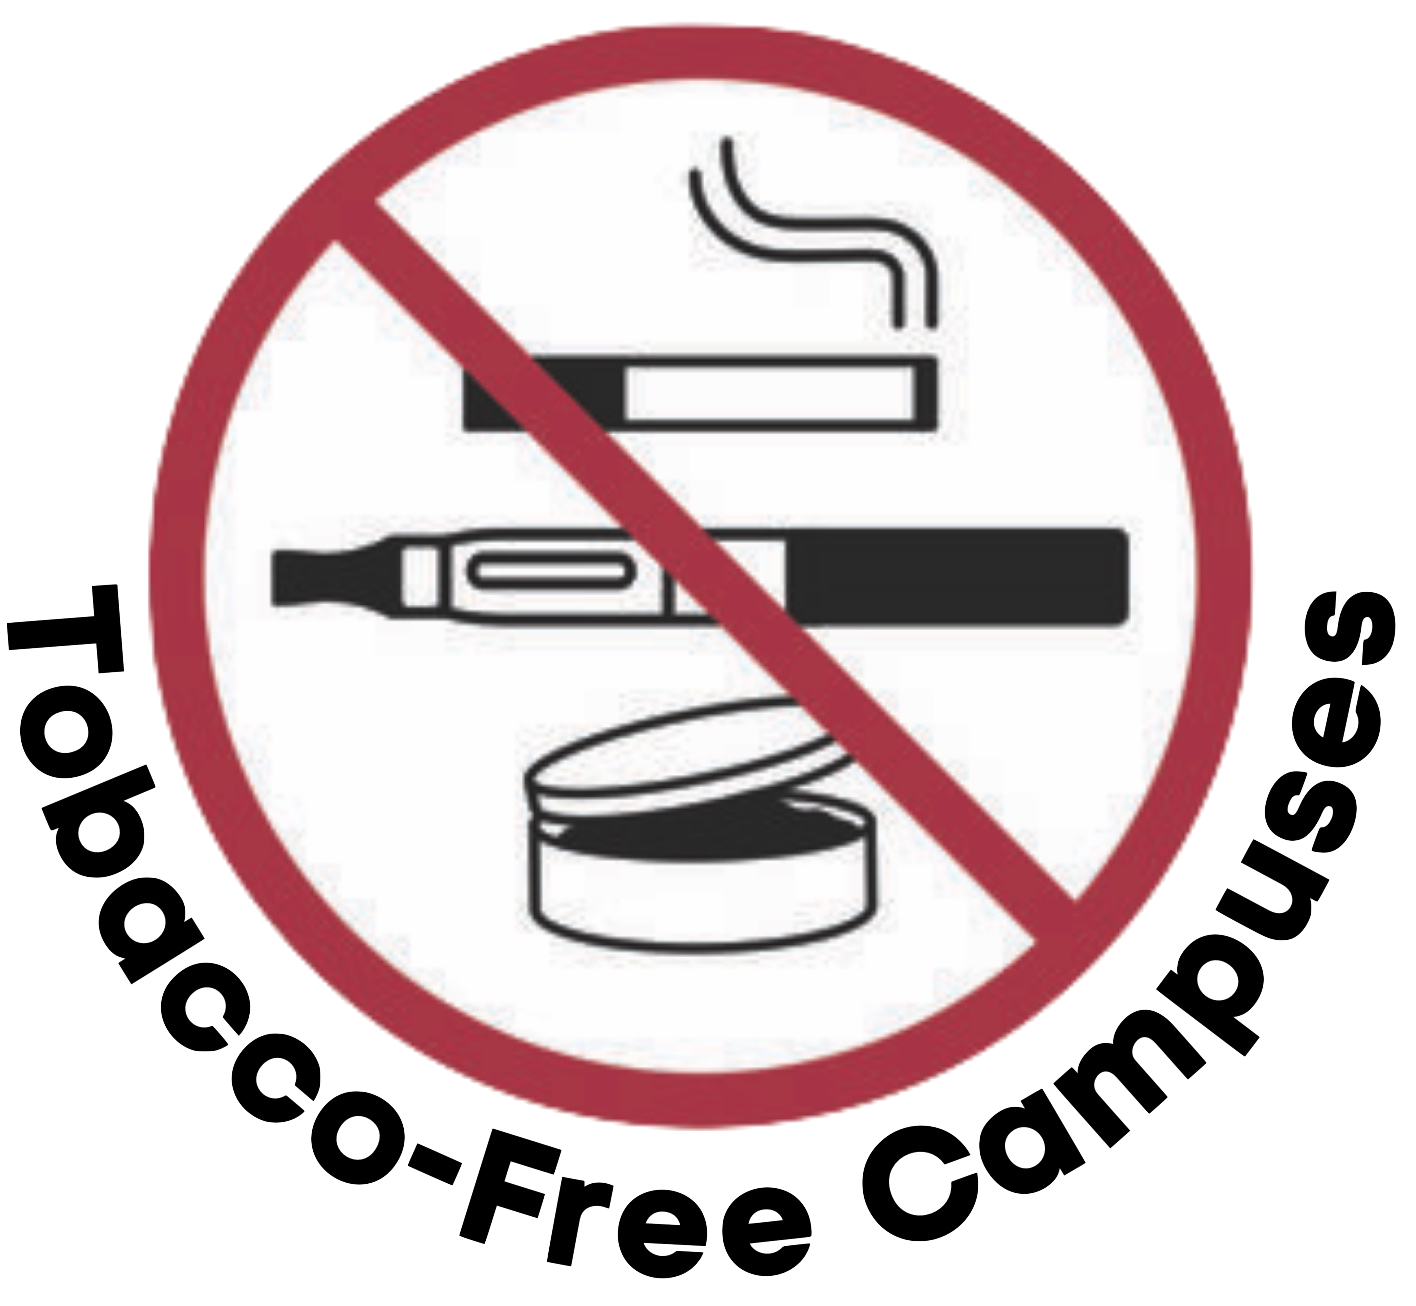 Tobacco free campuses